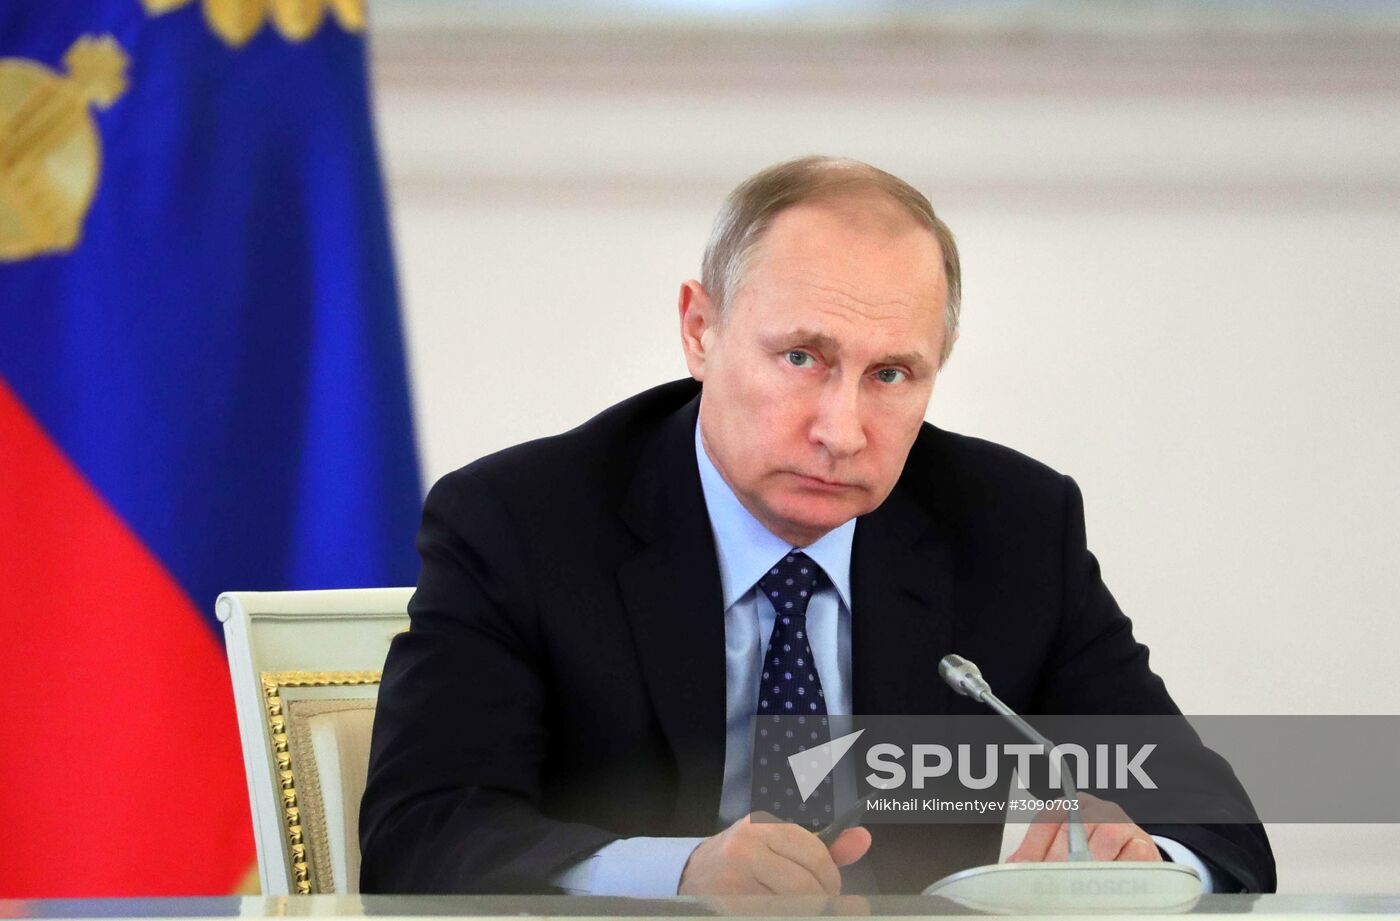 President Vladimir Putin State Council and Commission for Monitoring Socioeconomic Development